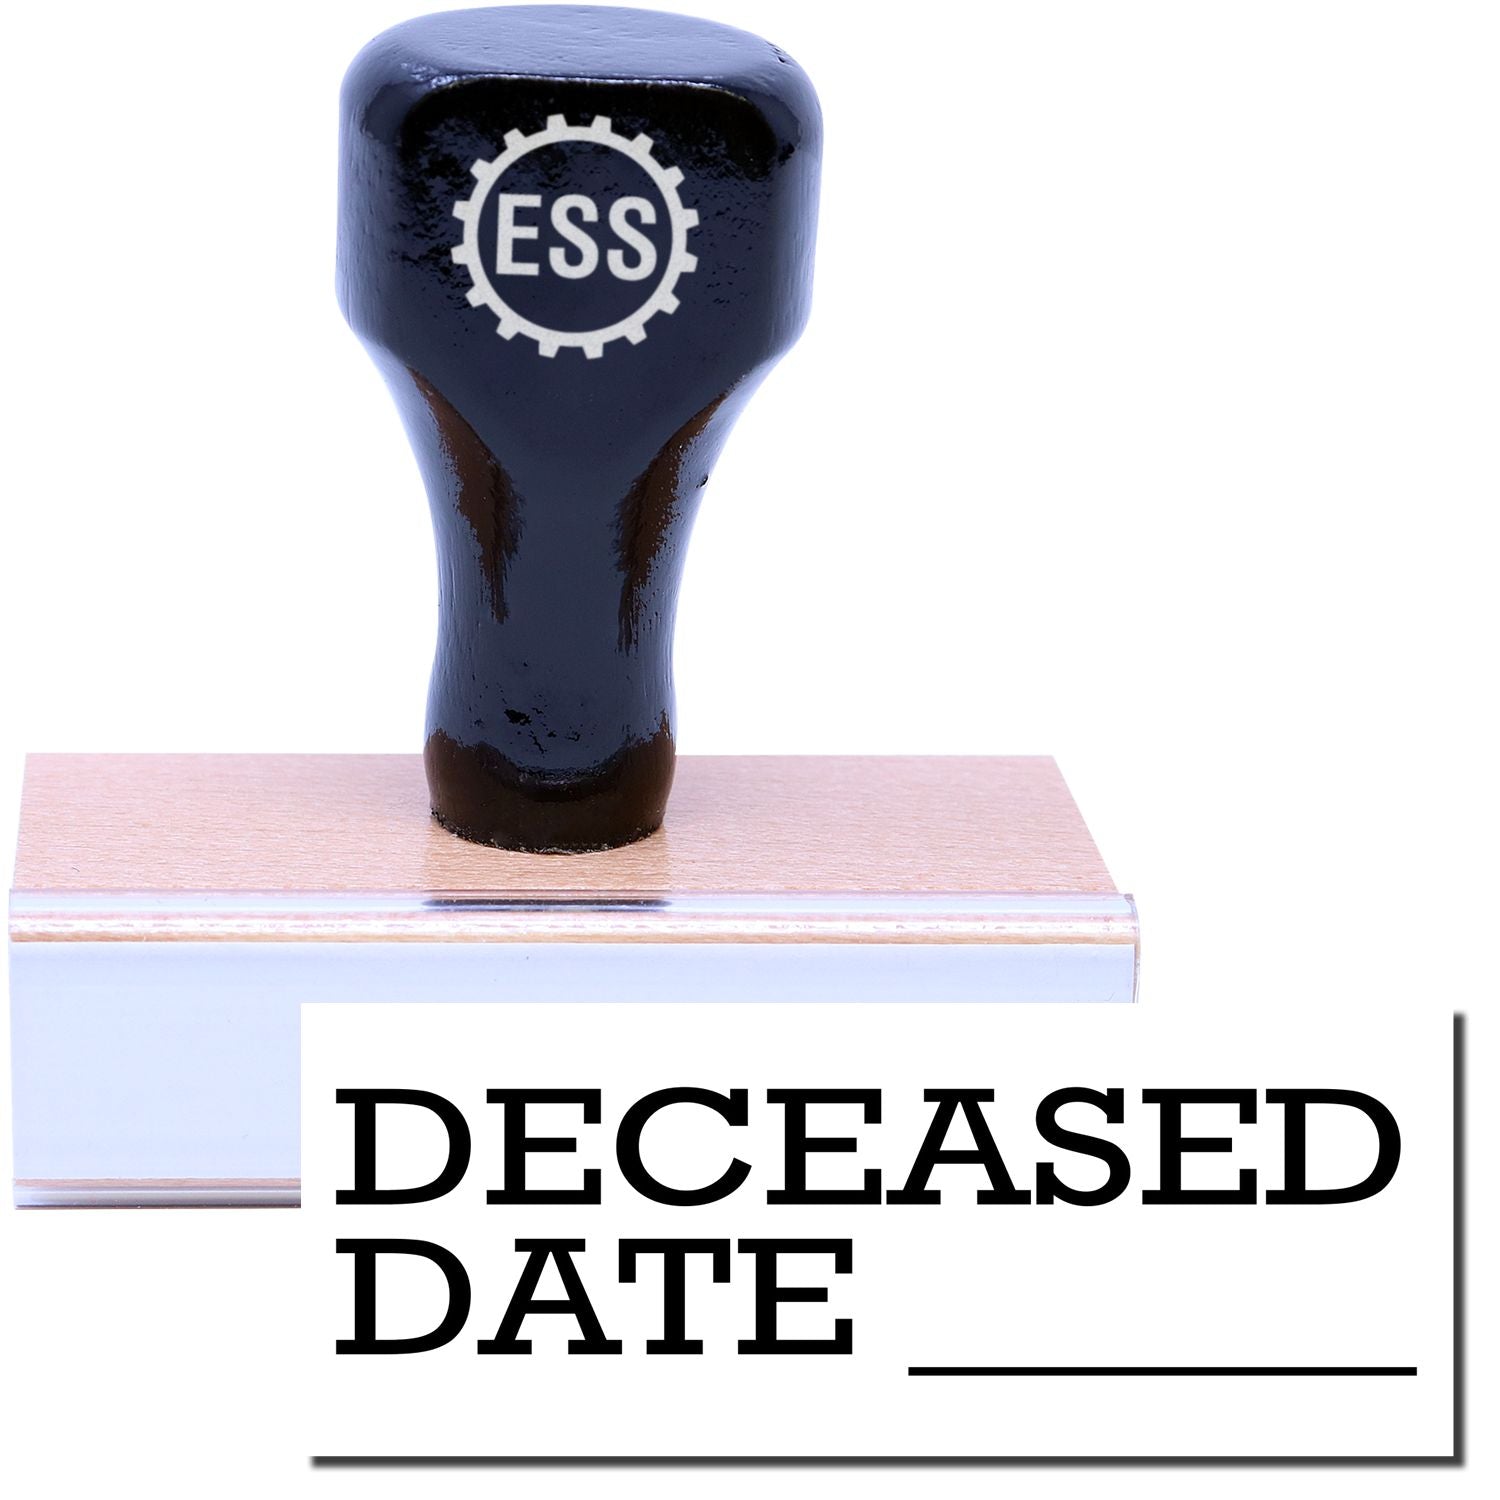 A stock office medical rubber stamp with a stamped image showing how the text "DECEASED DATE" with a line for writing date is displayed after stamping.